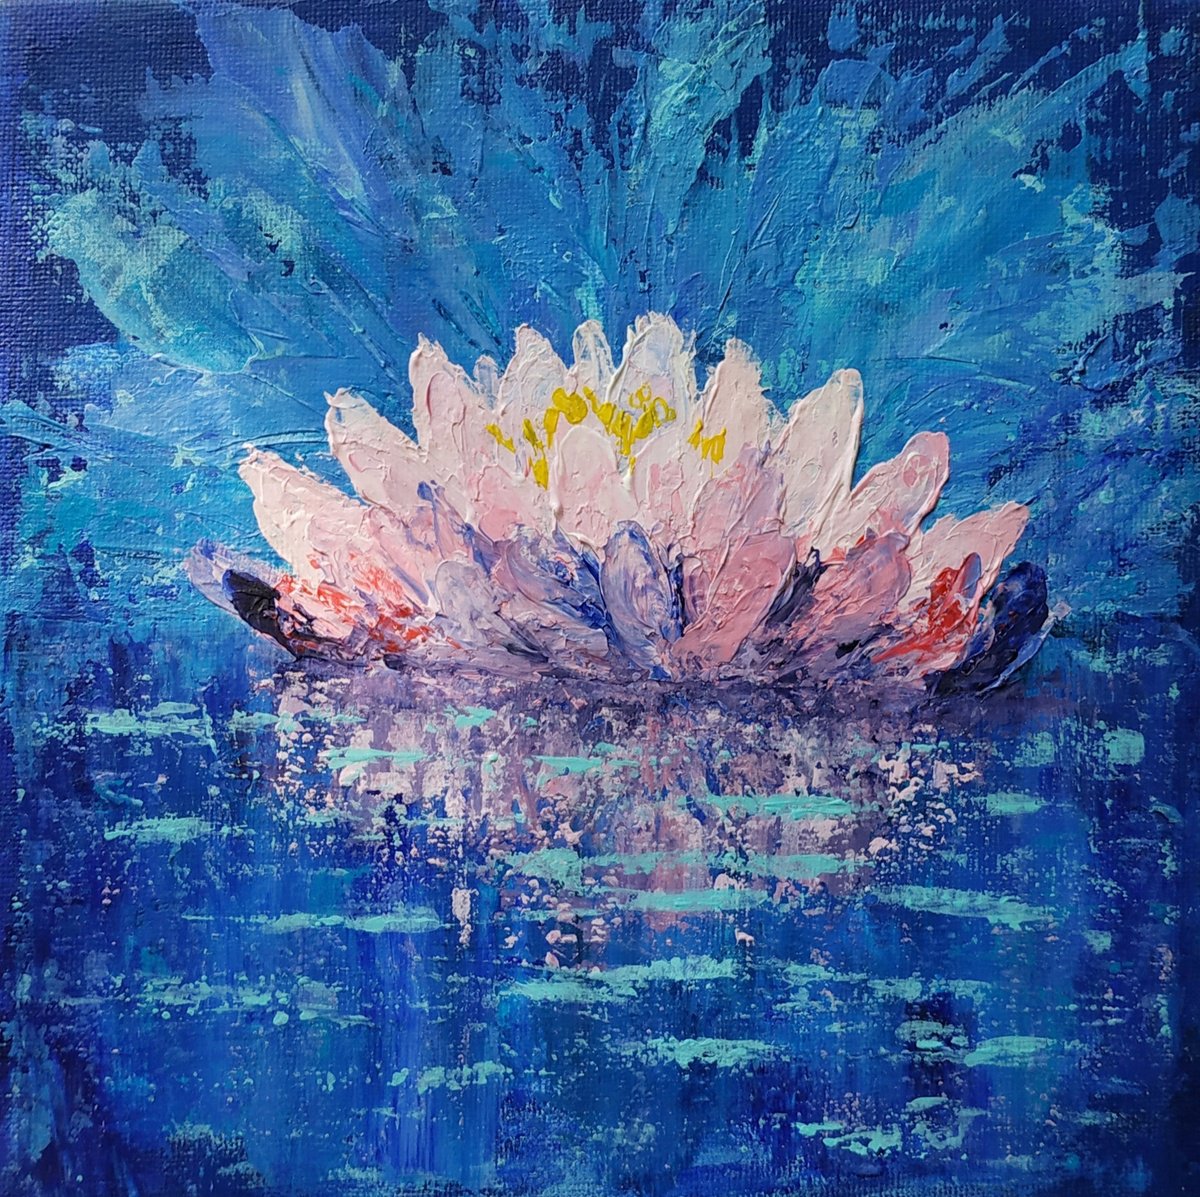 Water lily by Olena Poleva